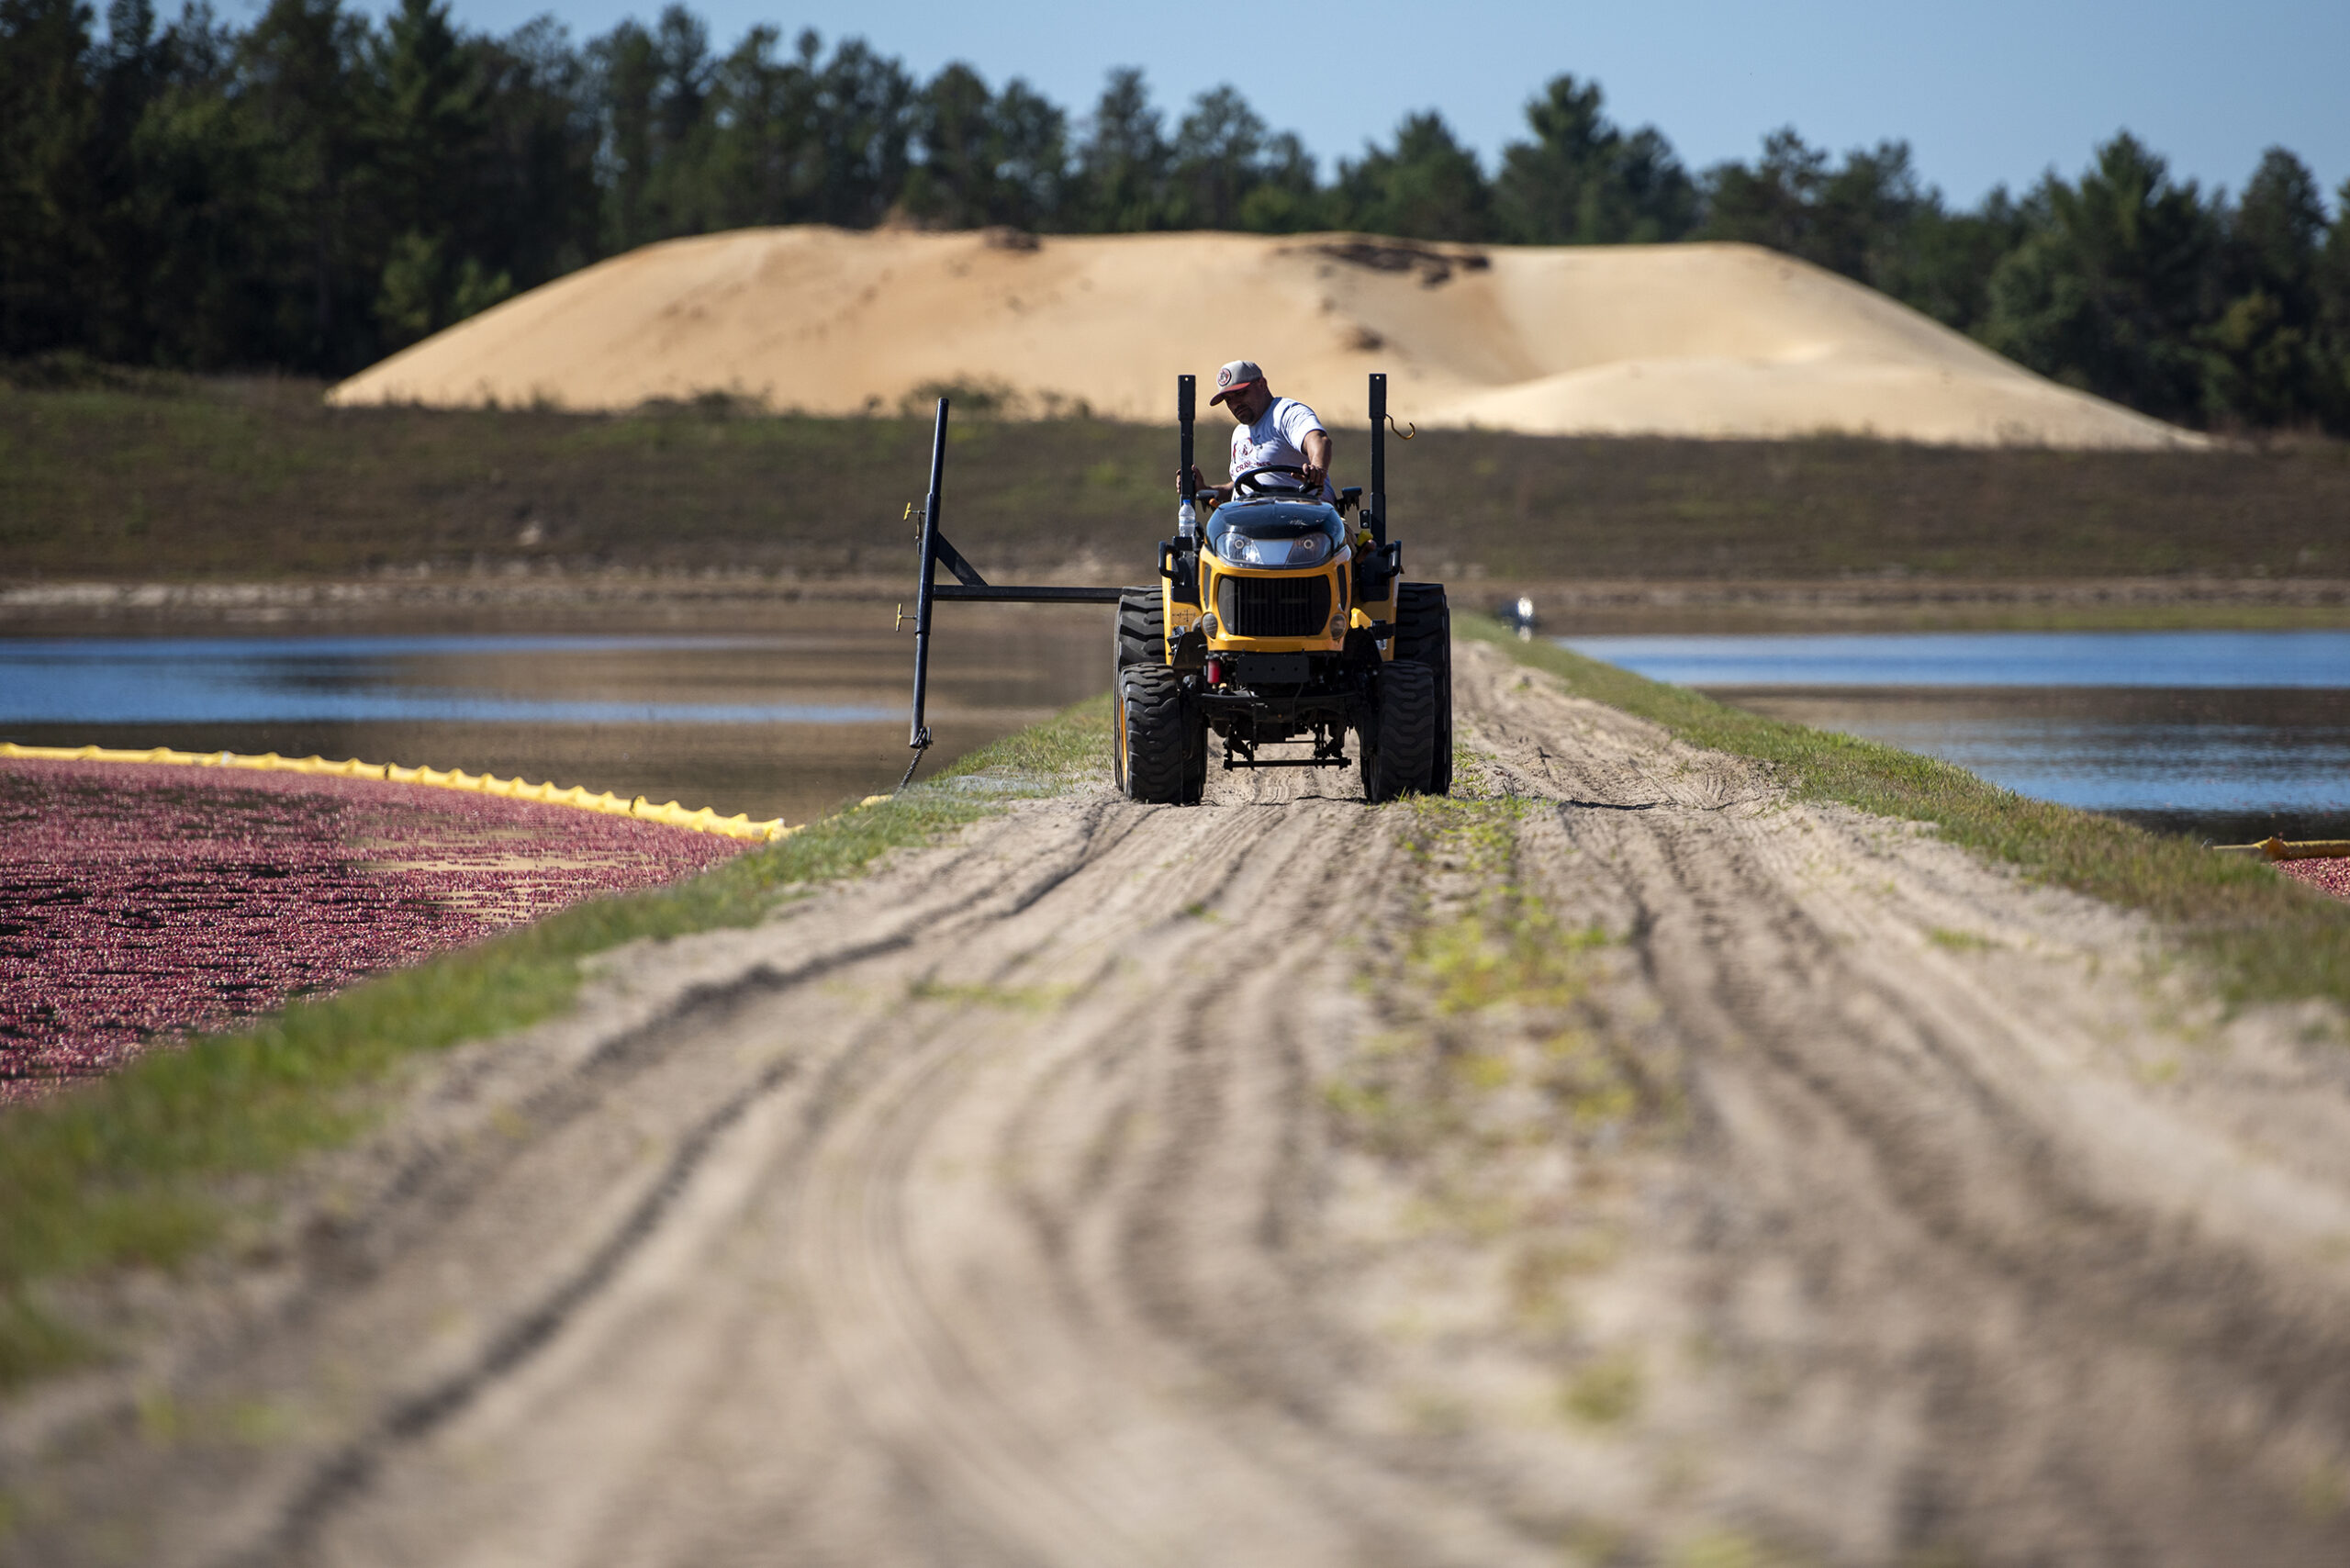 A man in a small tractor drives on a dirt pathway as he moves an attached divider to help corral the cranberries.